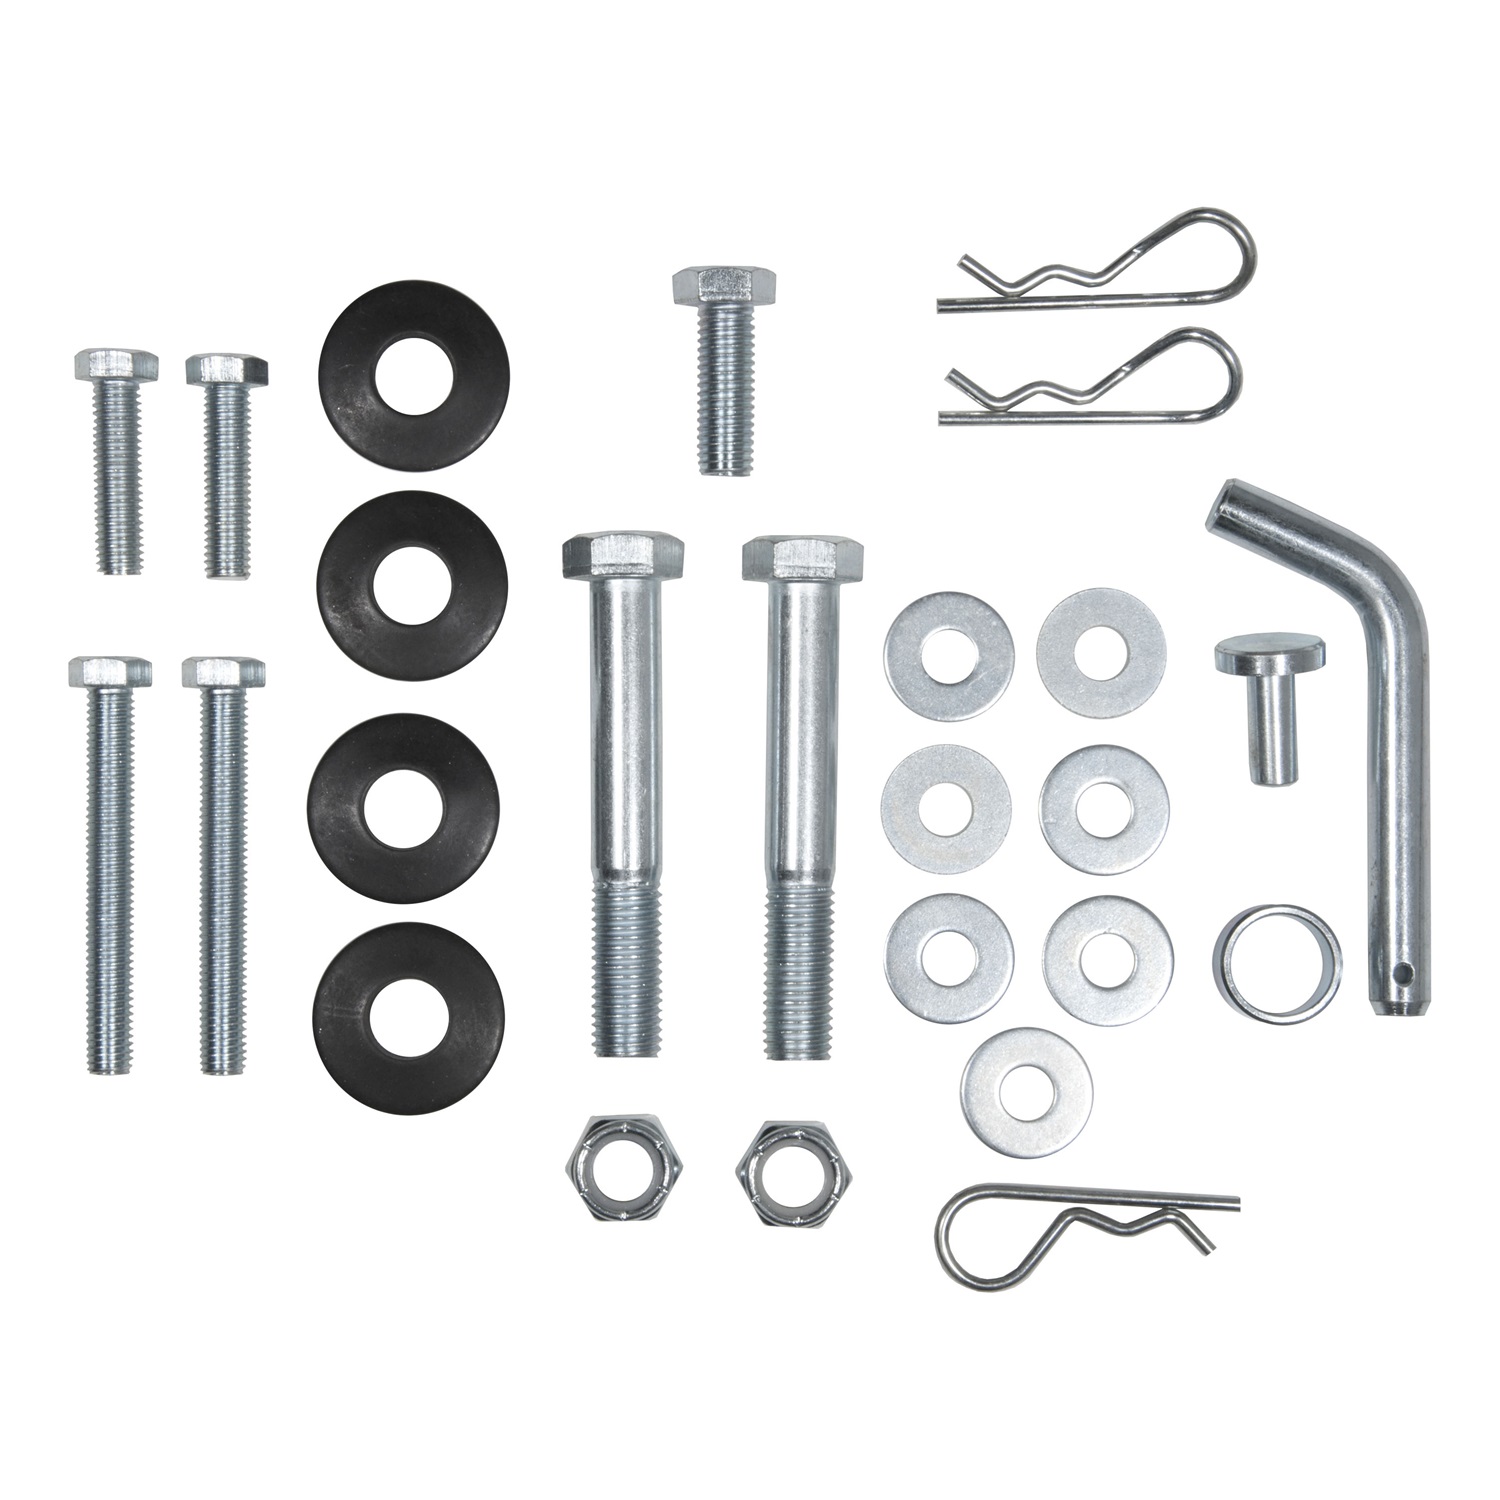 CURT Manufacturing CURT Manufacturing 17150 Weight Distribution Bolt Kit  Fits